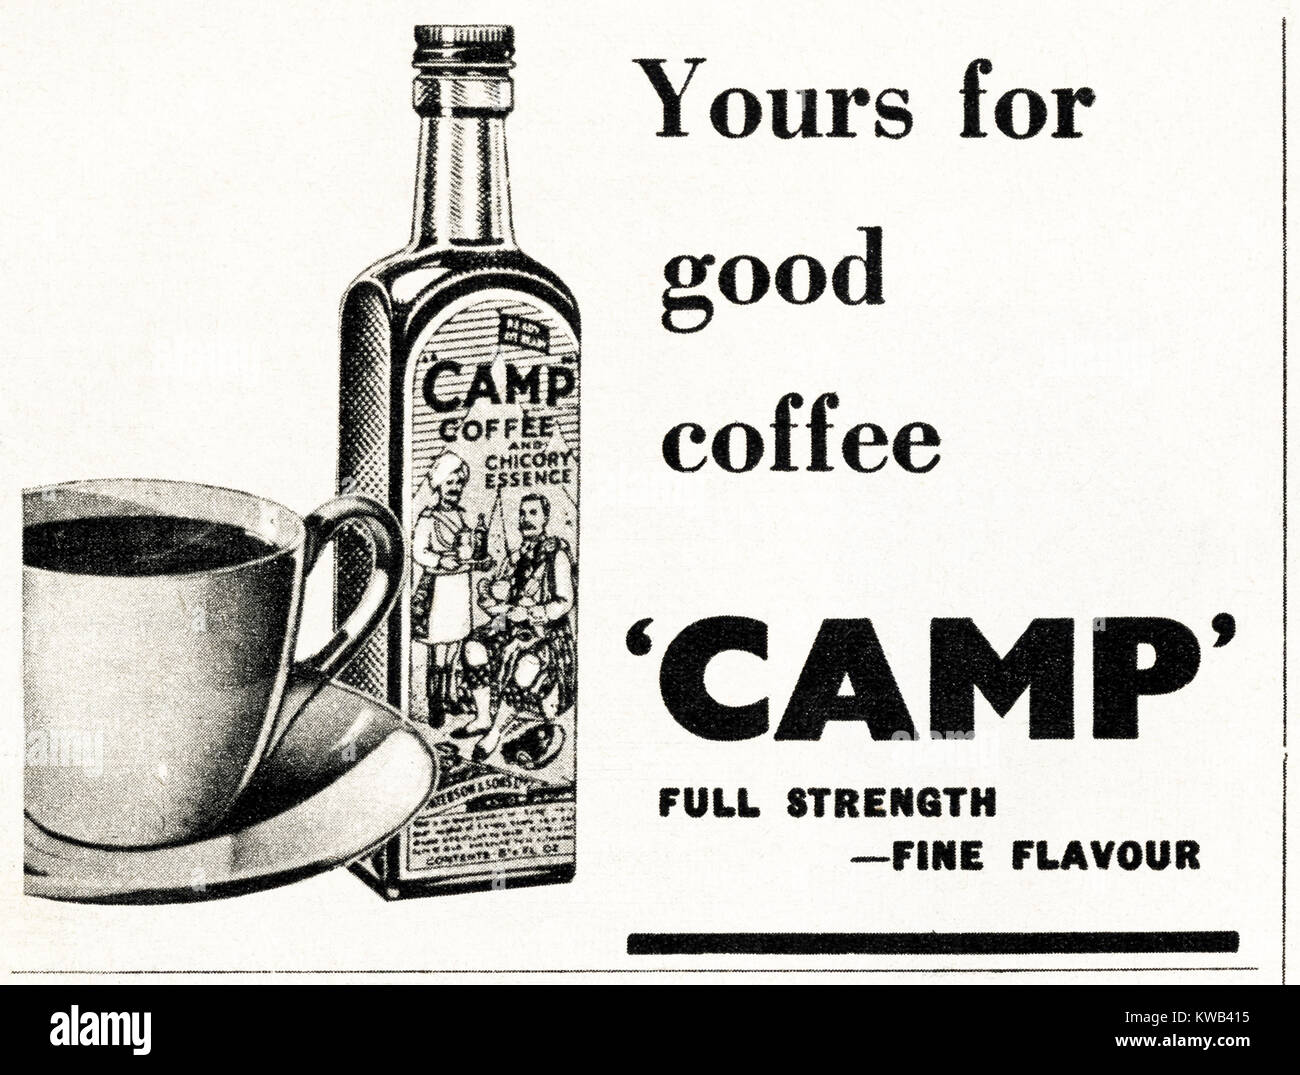 1940s old vintage original advert advertising Camp Coffee with chicory essence in magazine circa 1947 when supplies were still restricted under postwar rationing Stock Photo